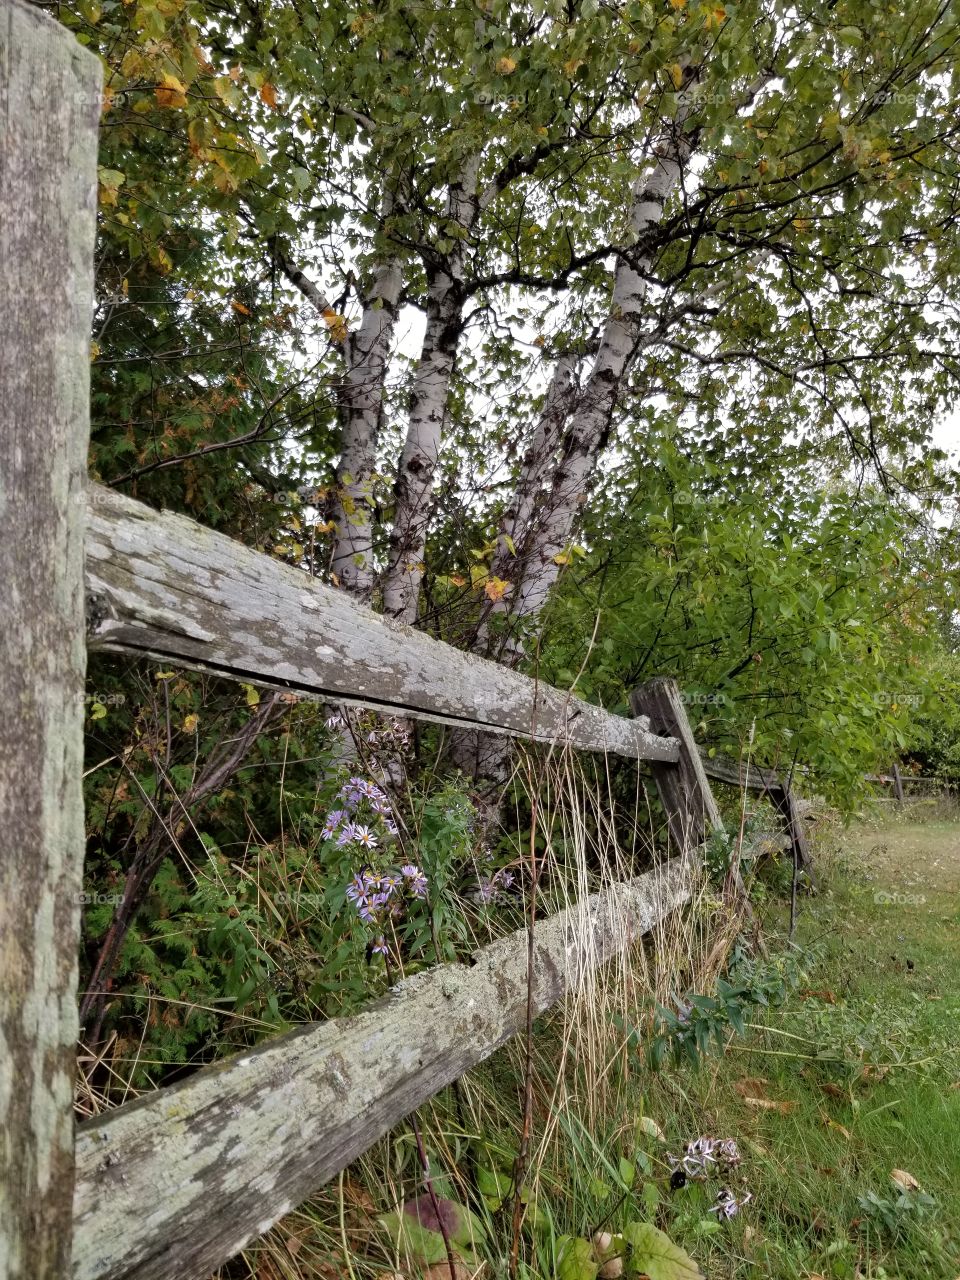 Birch tree behind wooden fence at an overlook in St. Ignes.